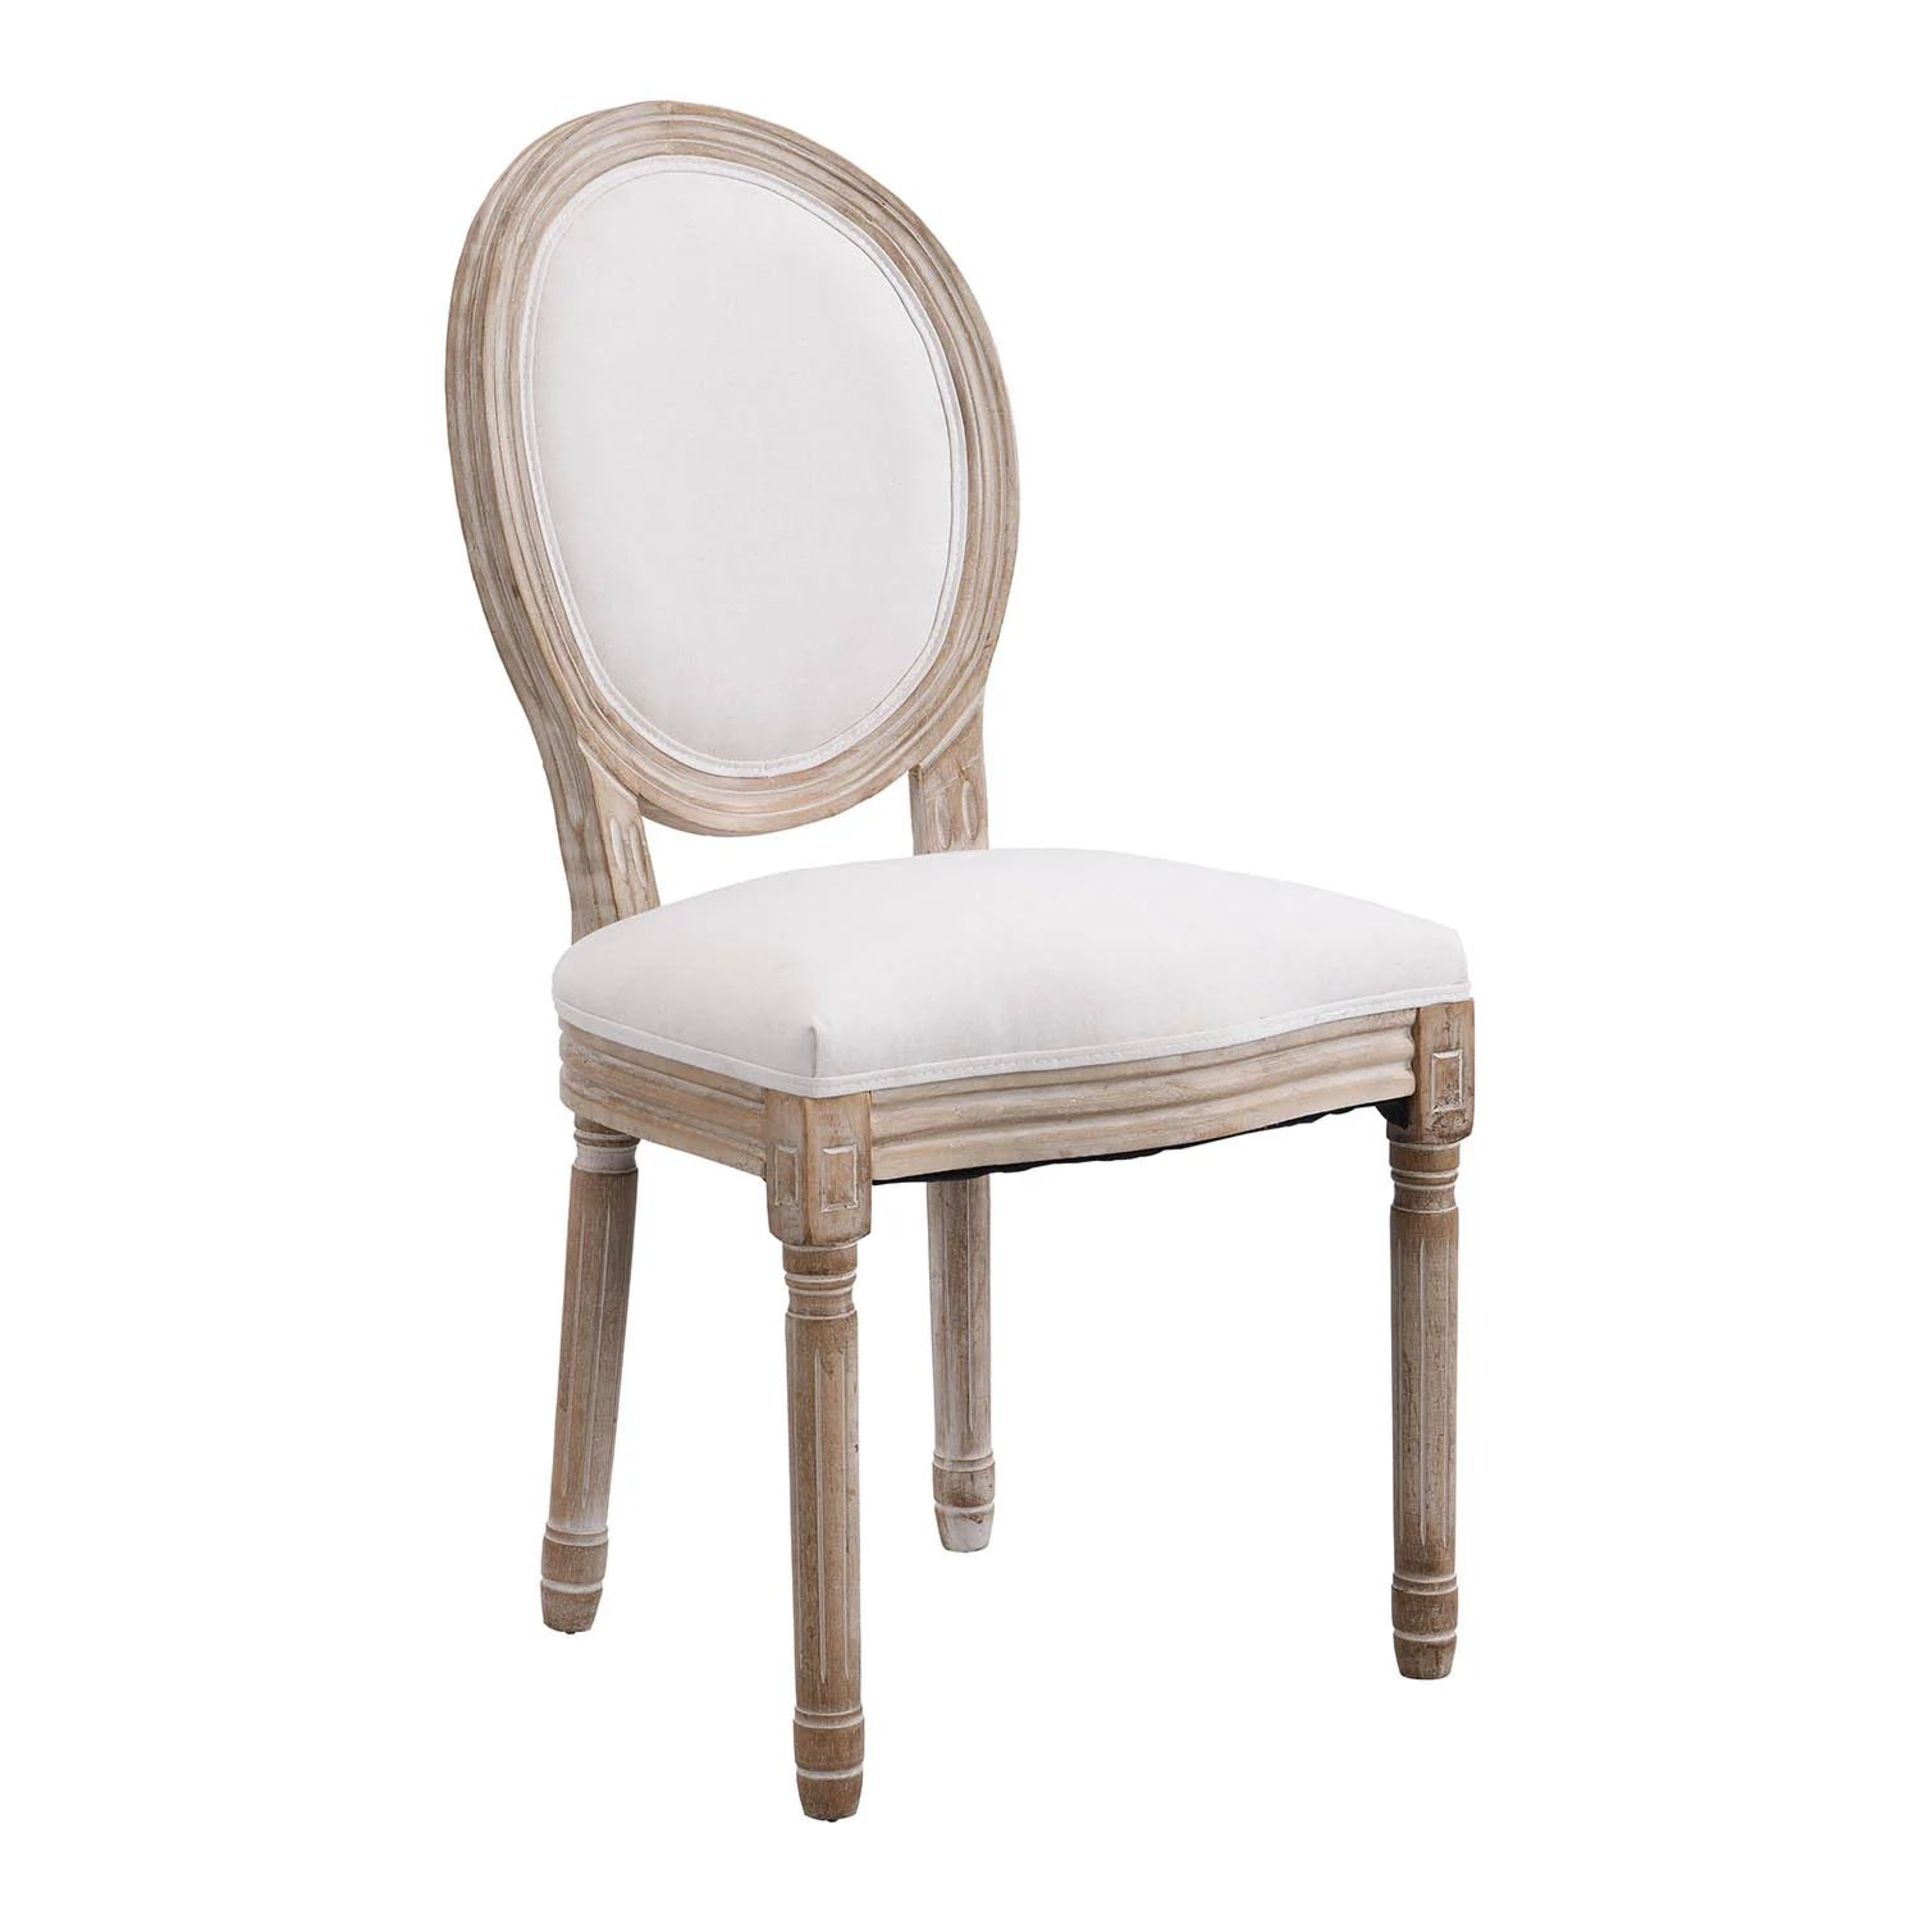 Lainston Set of 2 Classic Limewashed Wooden Dining Chairs, Beige. - ER29. RRP £299.99. Inspired by - Image 2 of 2